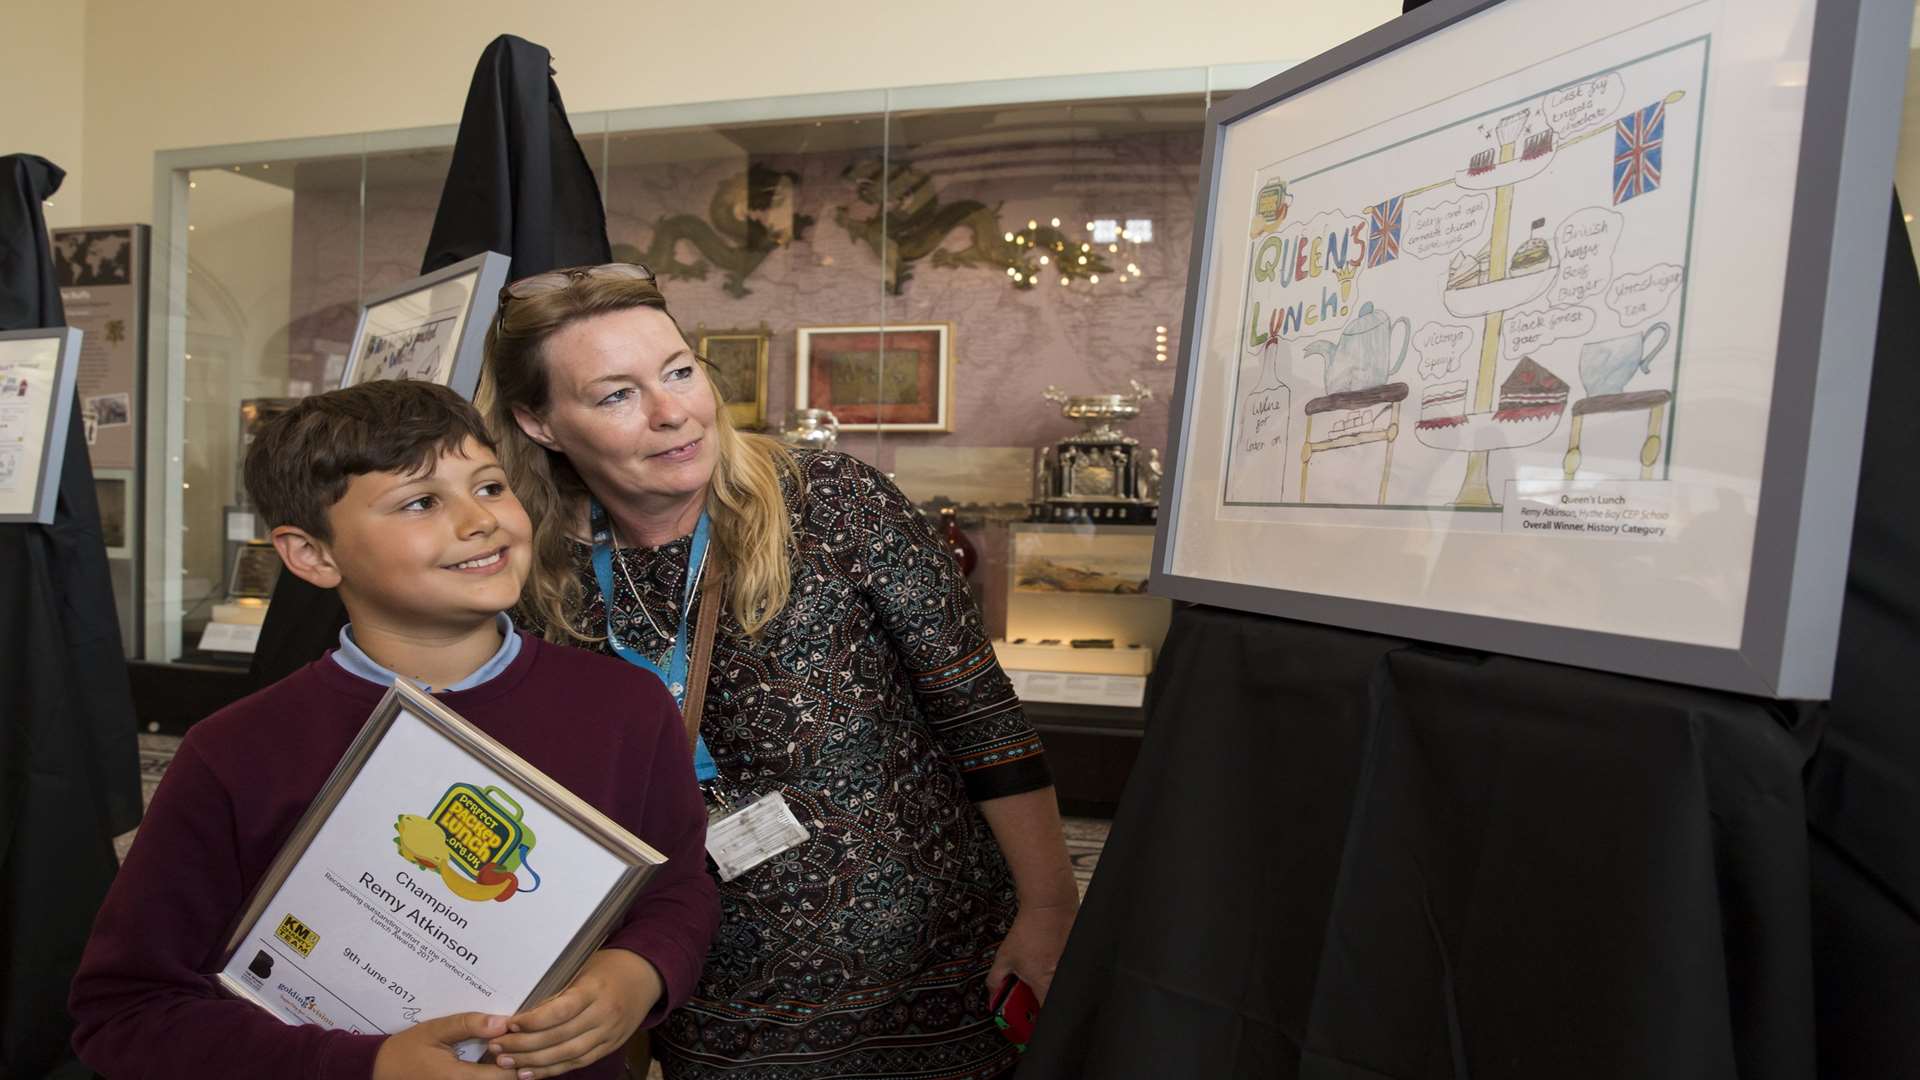 Remy Atkinson aged 10 of Hythe Bay C of E Primary School was crowned Perfect Packed Lunch Awards Champion in June. The awards have moved to the autumn term and are now open for entry.